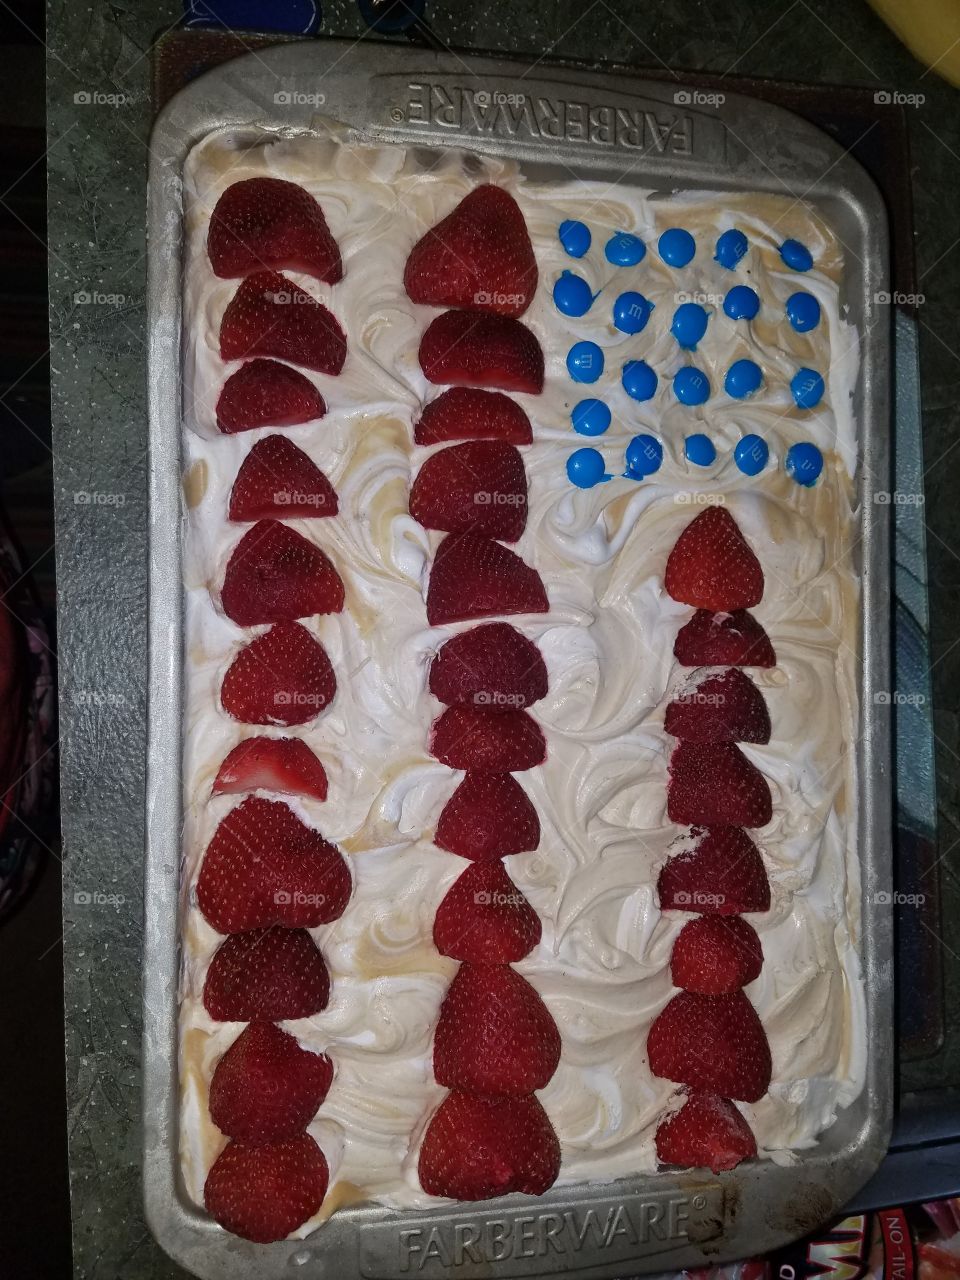 Peanut Butter Whipped Cream Flag Cake with blue M&Ms and strawberries!